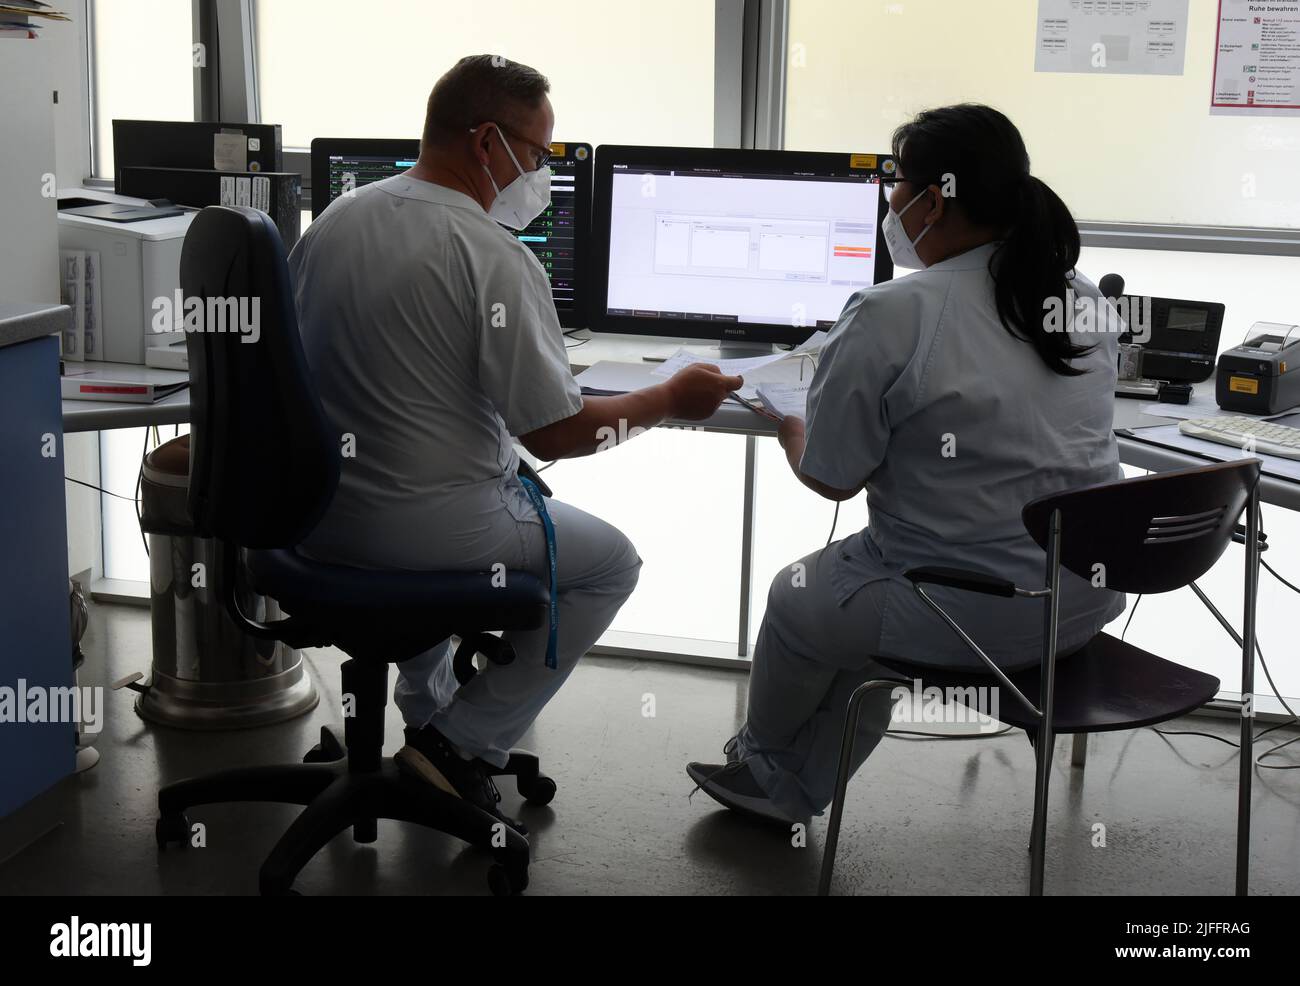 30 June 2022, Saxony, Leipzig: In the intensive care unit (ITS) at Klinikum St. Georg, ward manager Enrica Balder (l) consults with nurse Phuong Anh Luu Dao about the duty roster. The hospital is currently operating about a quarter fewer beds than in the pre-Corona era. The reason is staff shortages and the introduction of nursing staff floors, a spokeswoman said. In addition, there are repeated absences due to staff suffering from Covid. Especially in the intensive care areas and during operations, the shortage affects the ability to act. (to dpa 'Situation in Saxon hospitals is tense') Photo Stock Photo